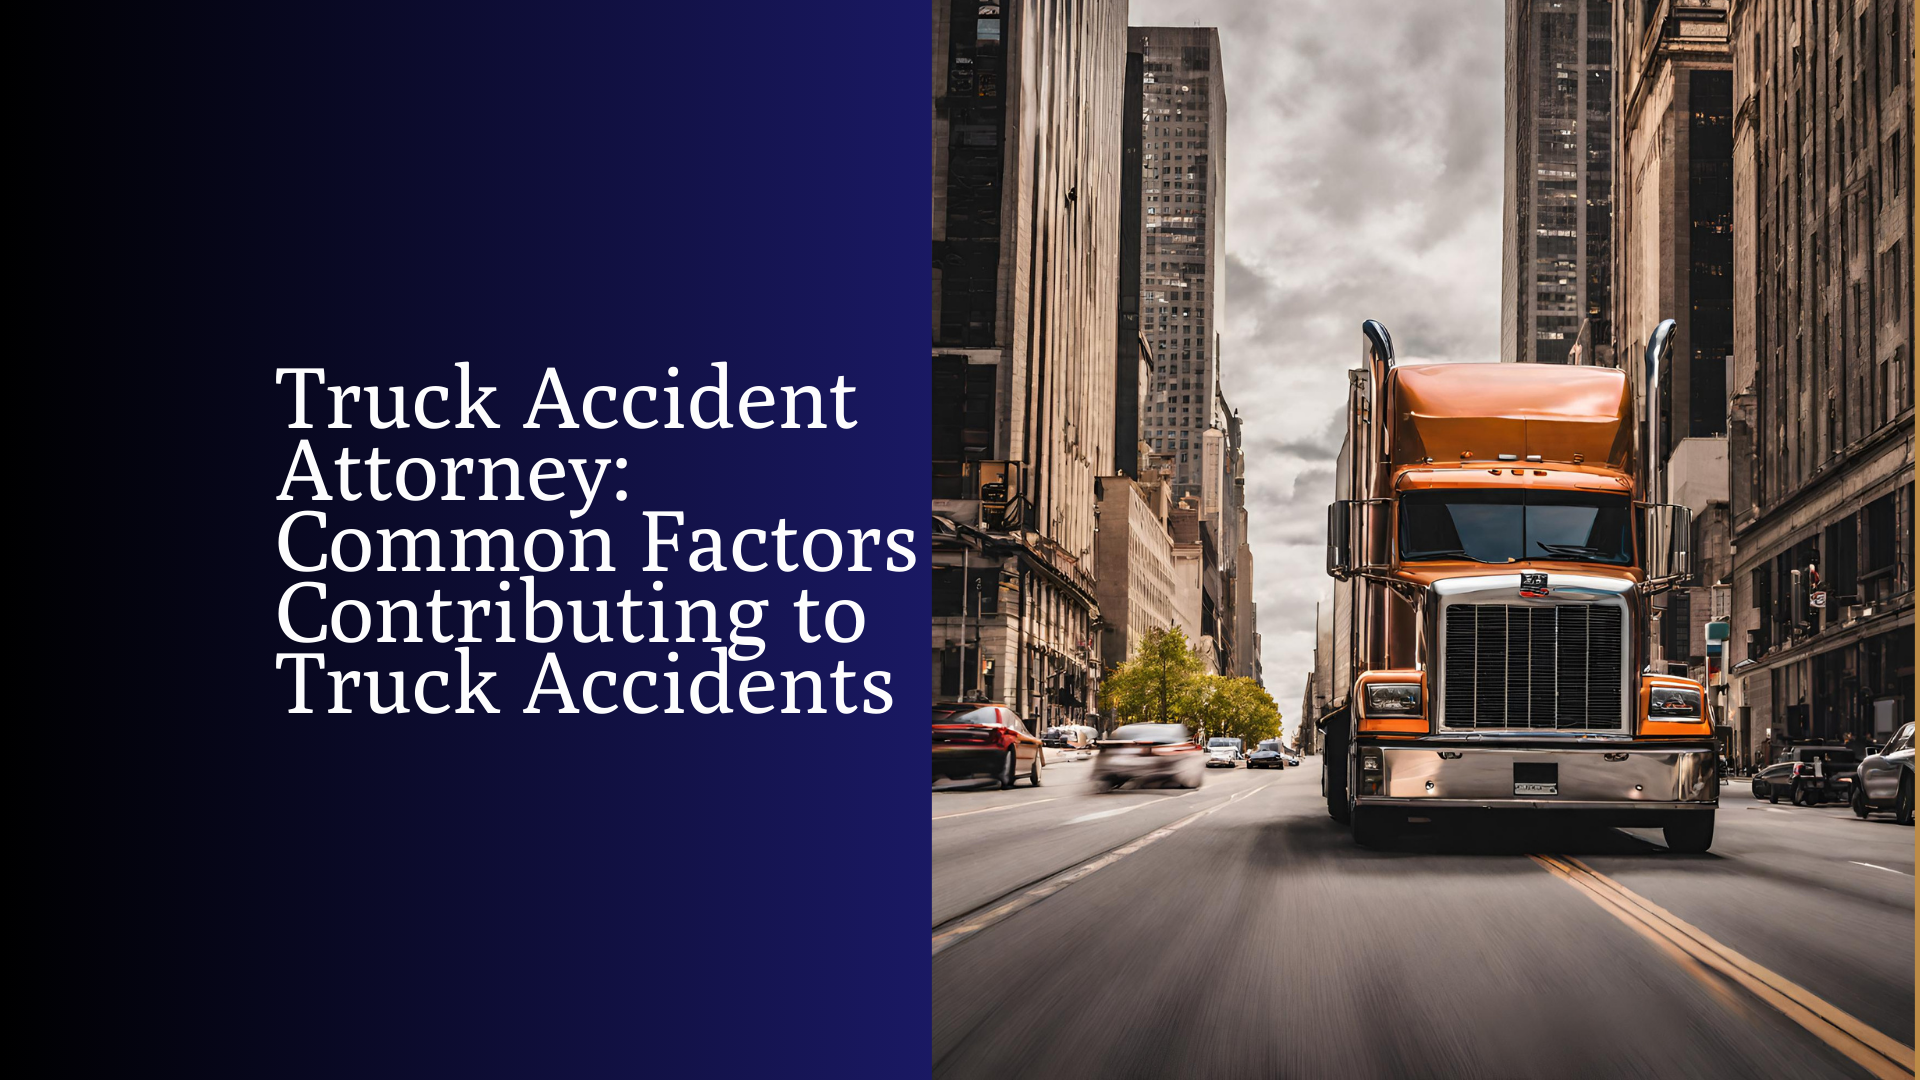 Truck-Accident-Attorney-Common-Factors-Contributing-to-Truck-Accidents